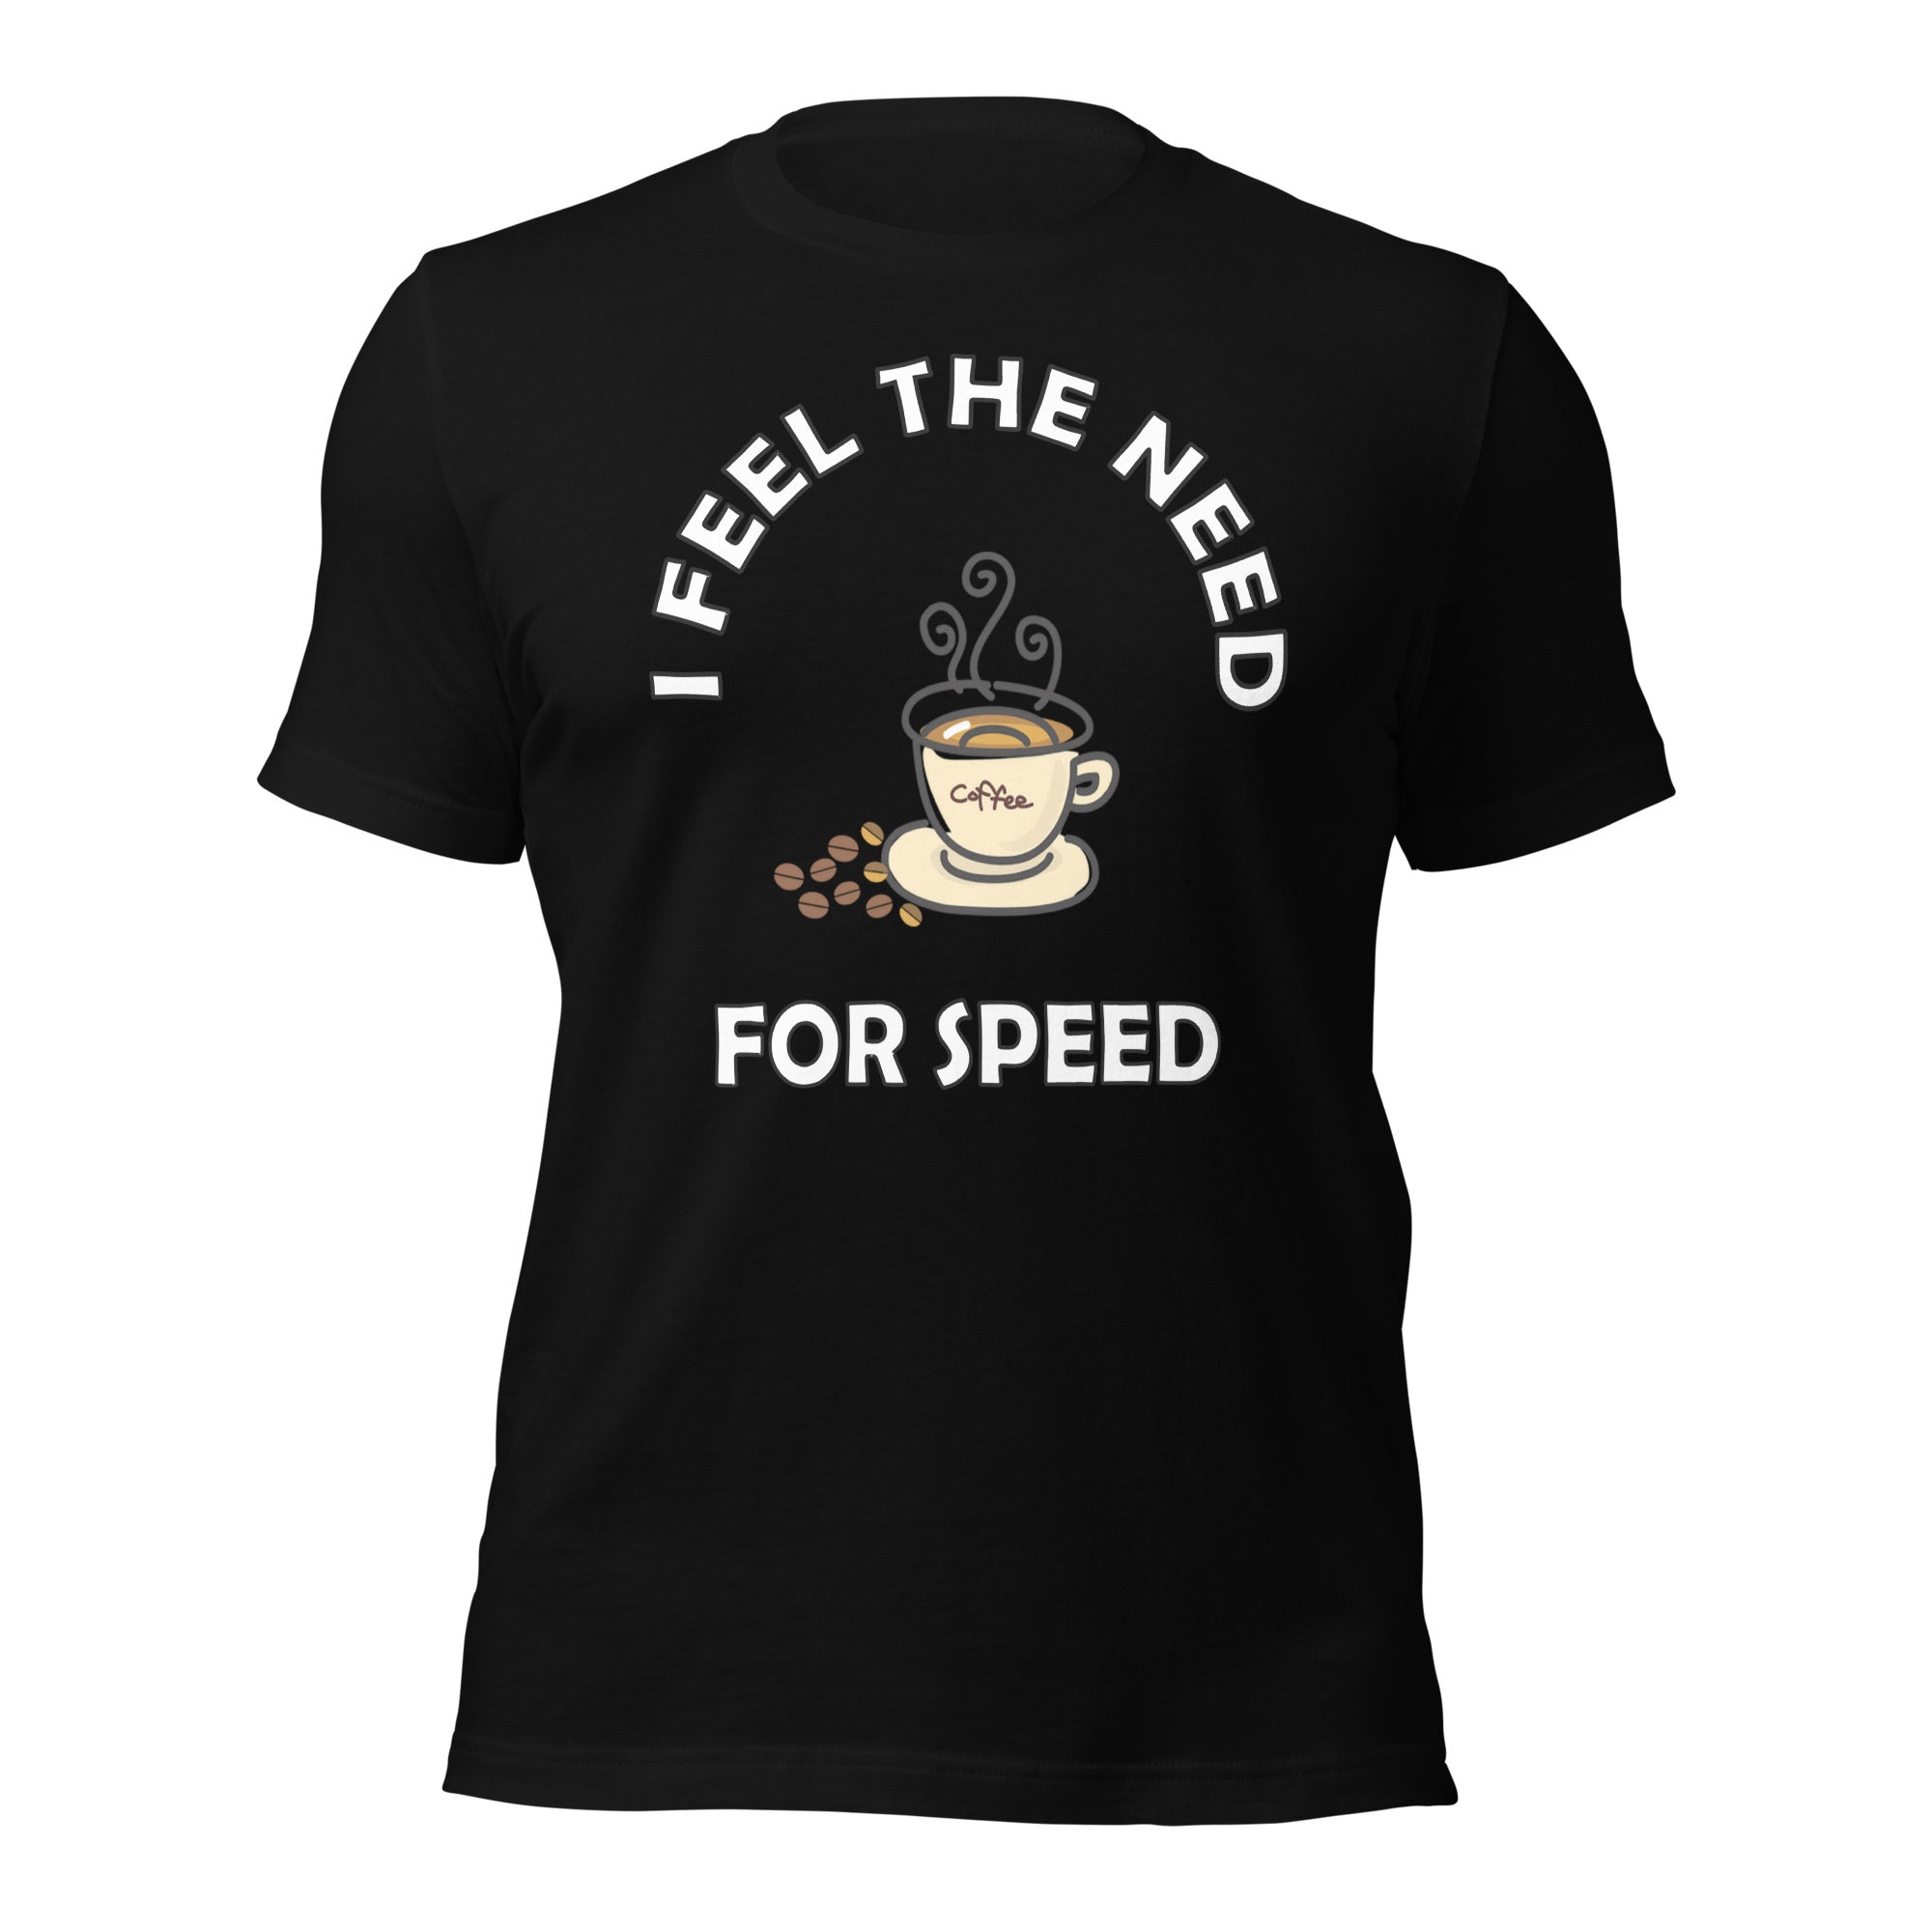 black t-shirt stating i feel the need for speed and featuring a hot cup of coffee and coffee beans